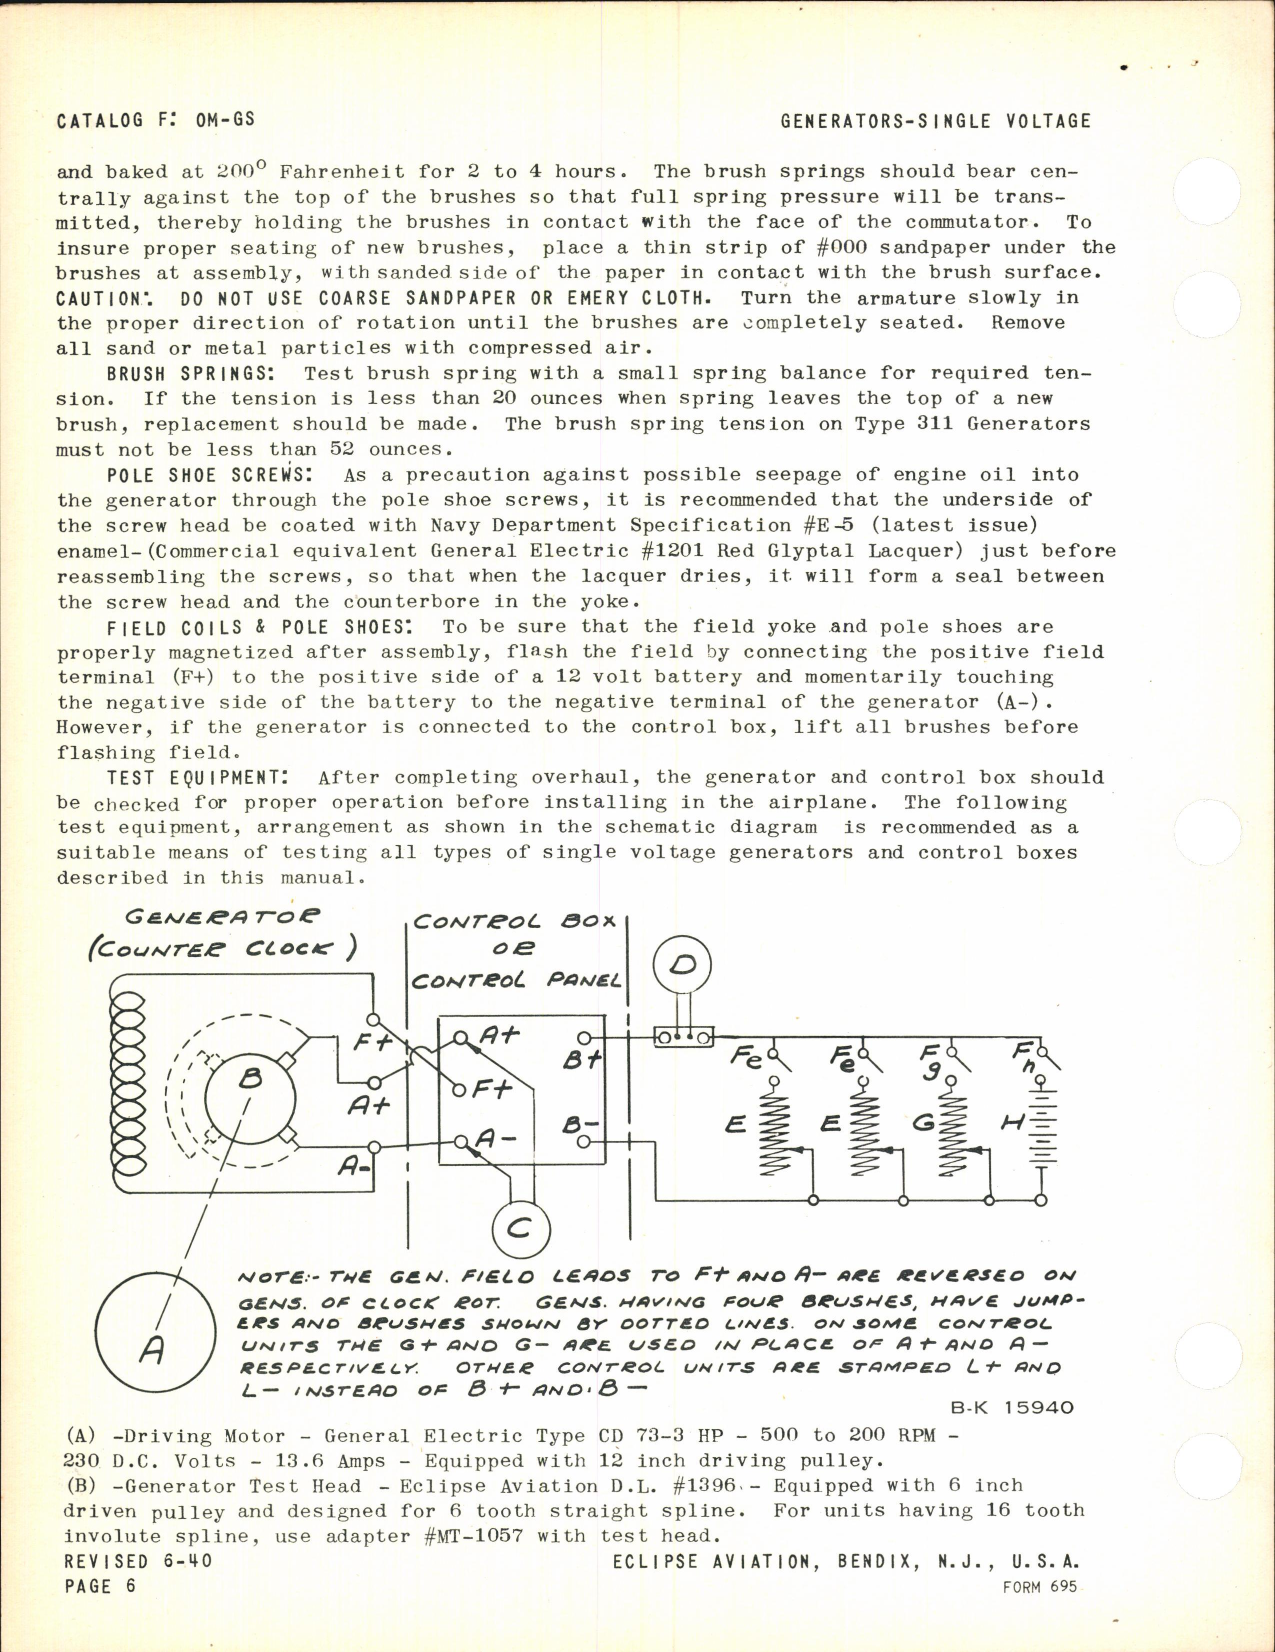 Sample page 6 from AirCorps Library document: Overhaul Instructions for Engine Driven Single Voltage Generators and Control Boxes or Panels